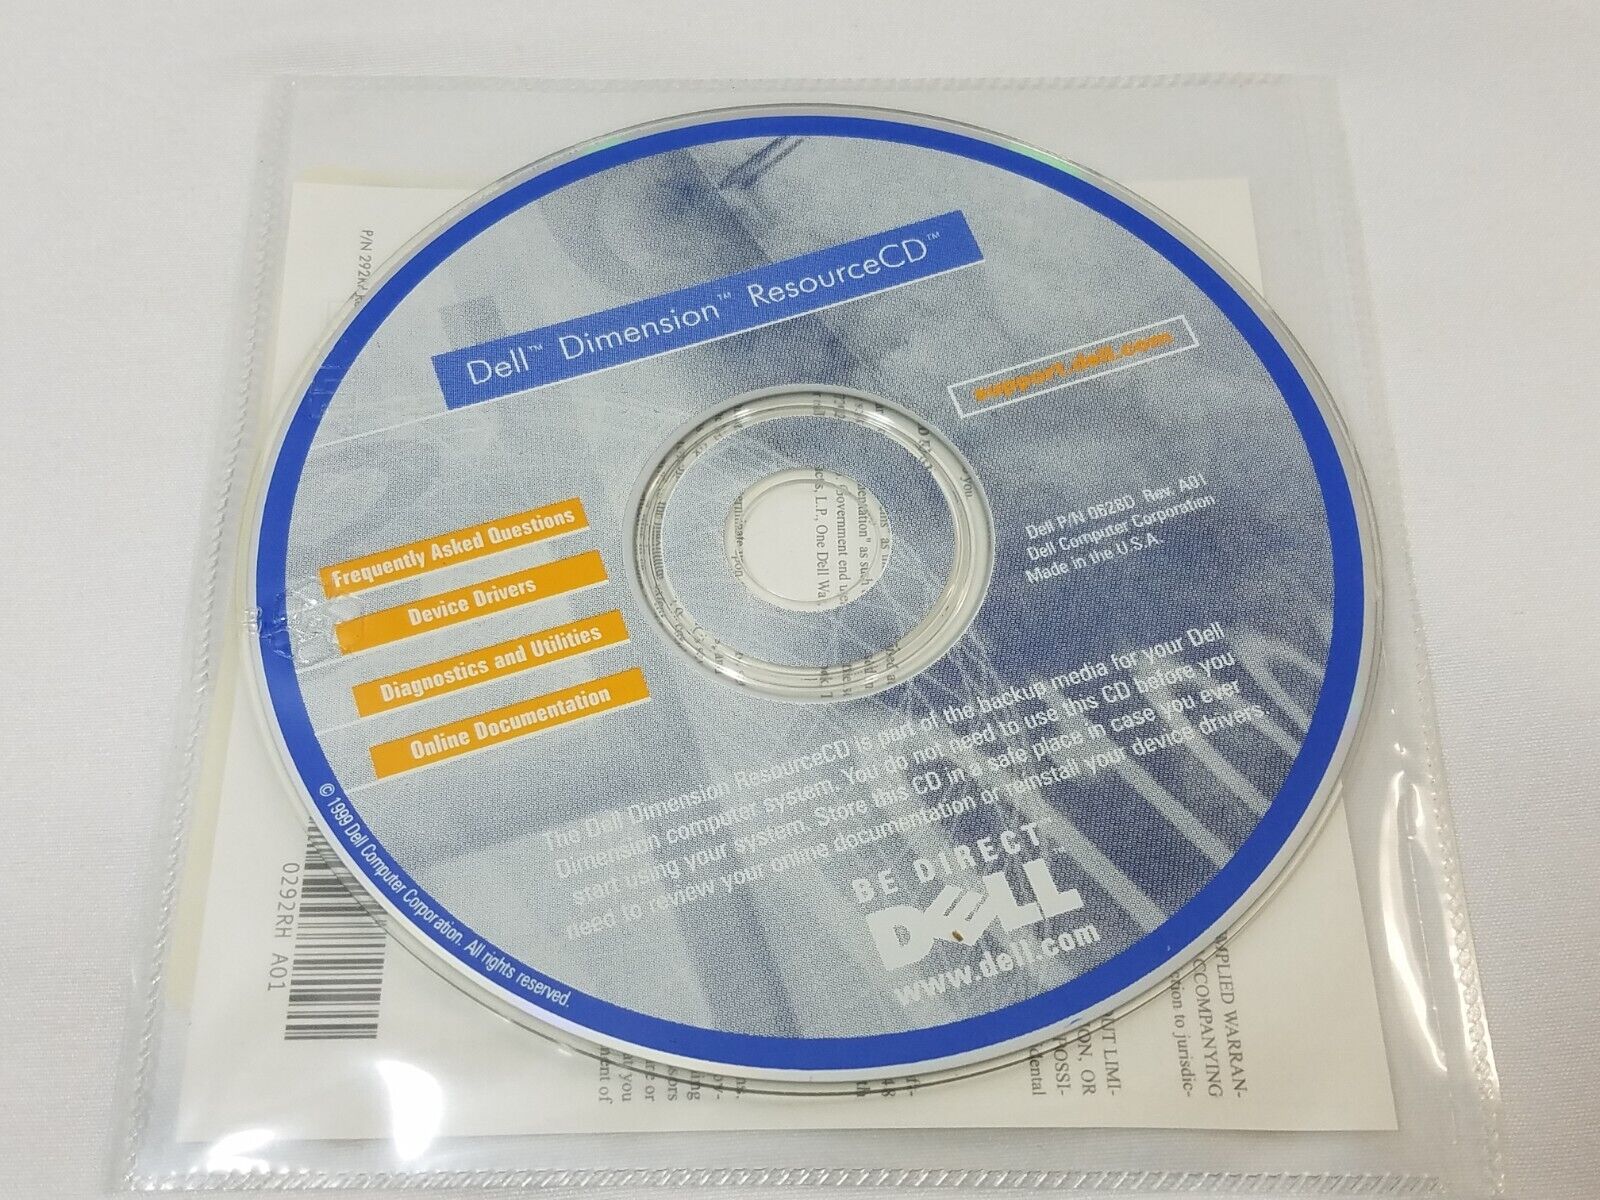 Dell Dimension Resource CD P/N 0628D